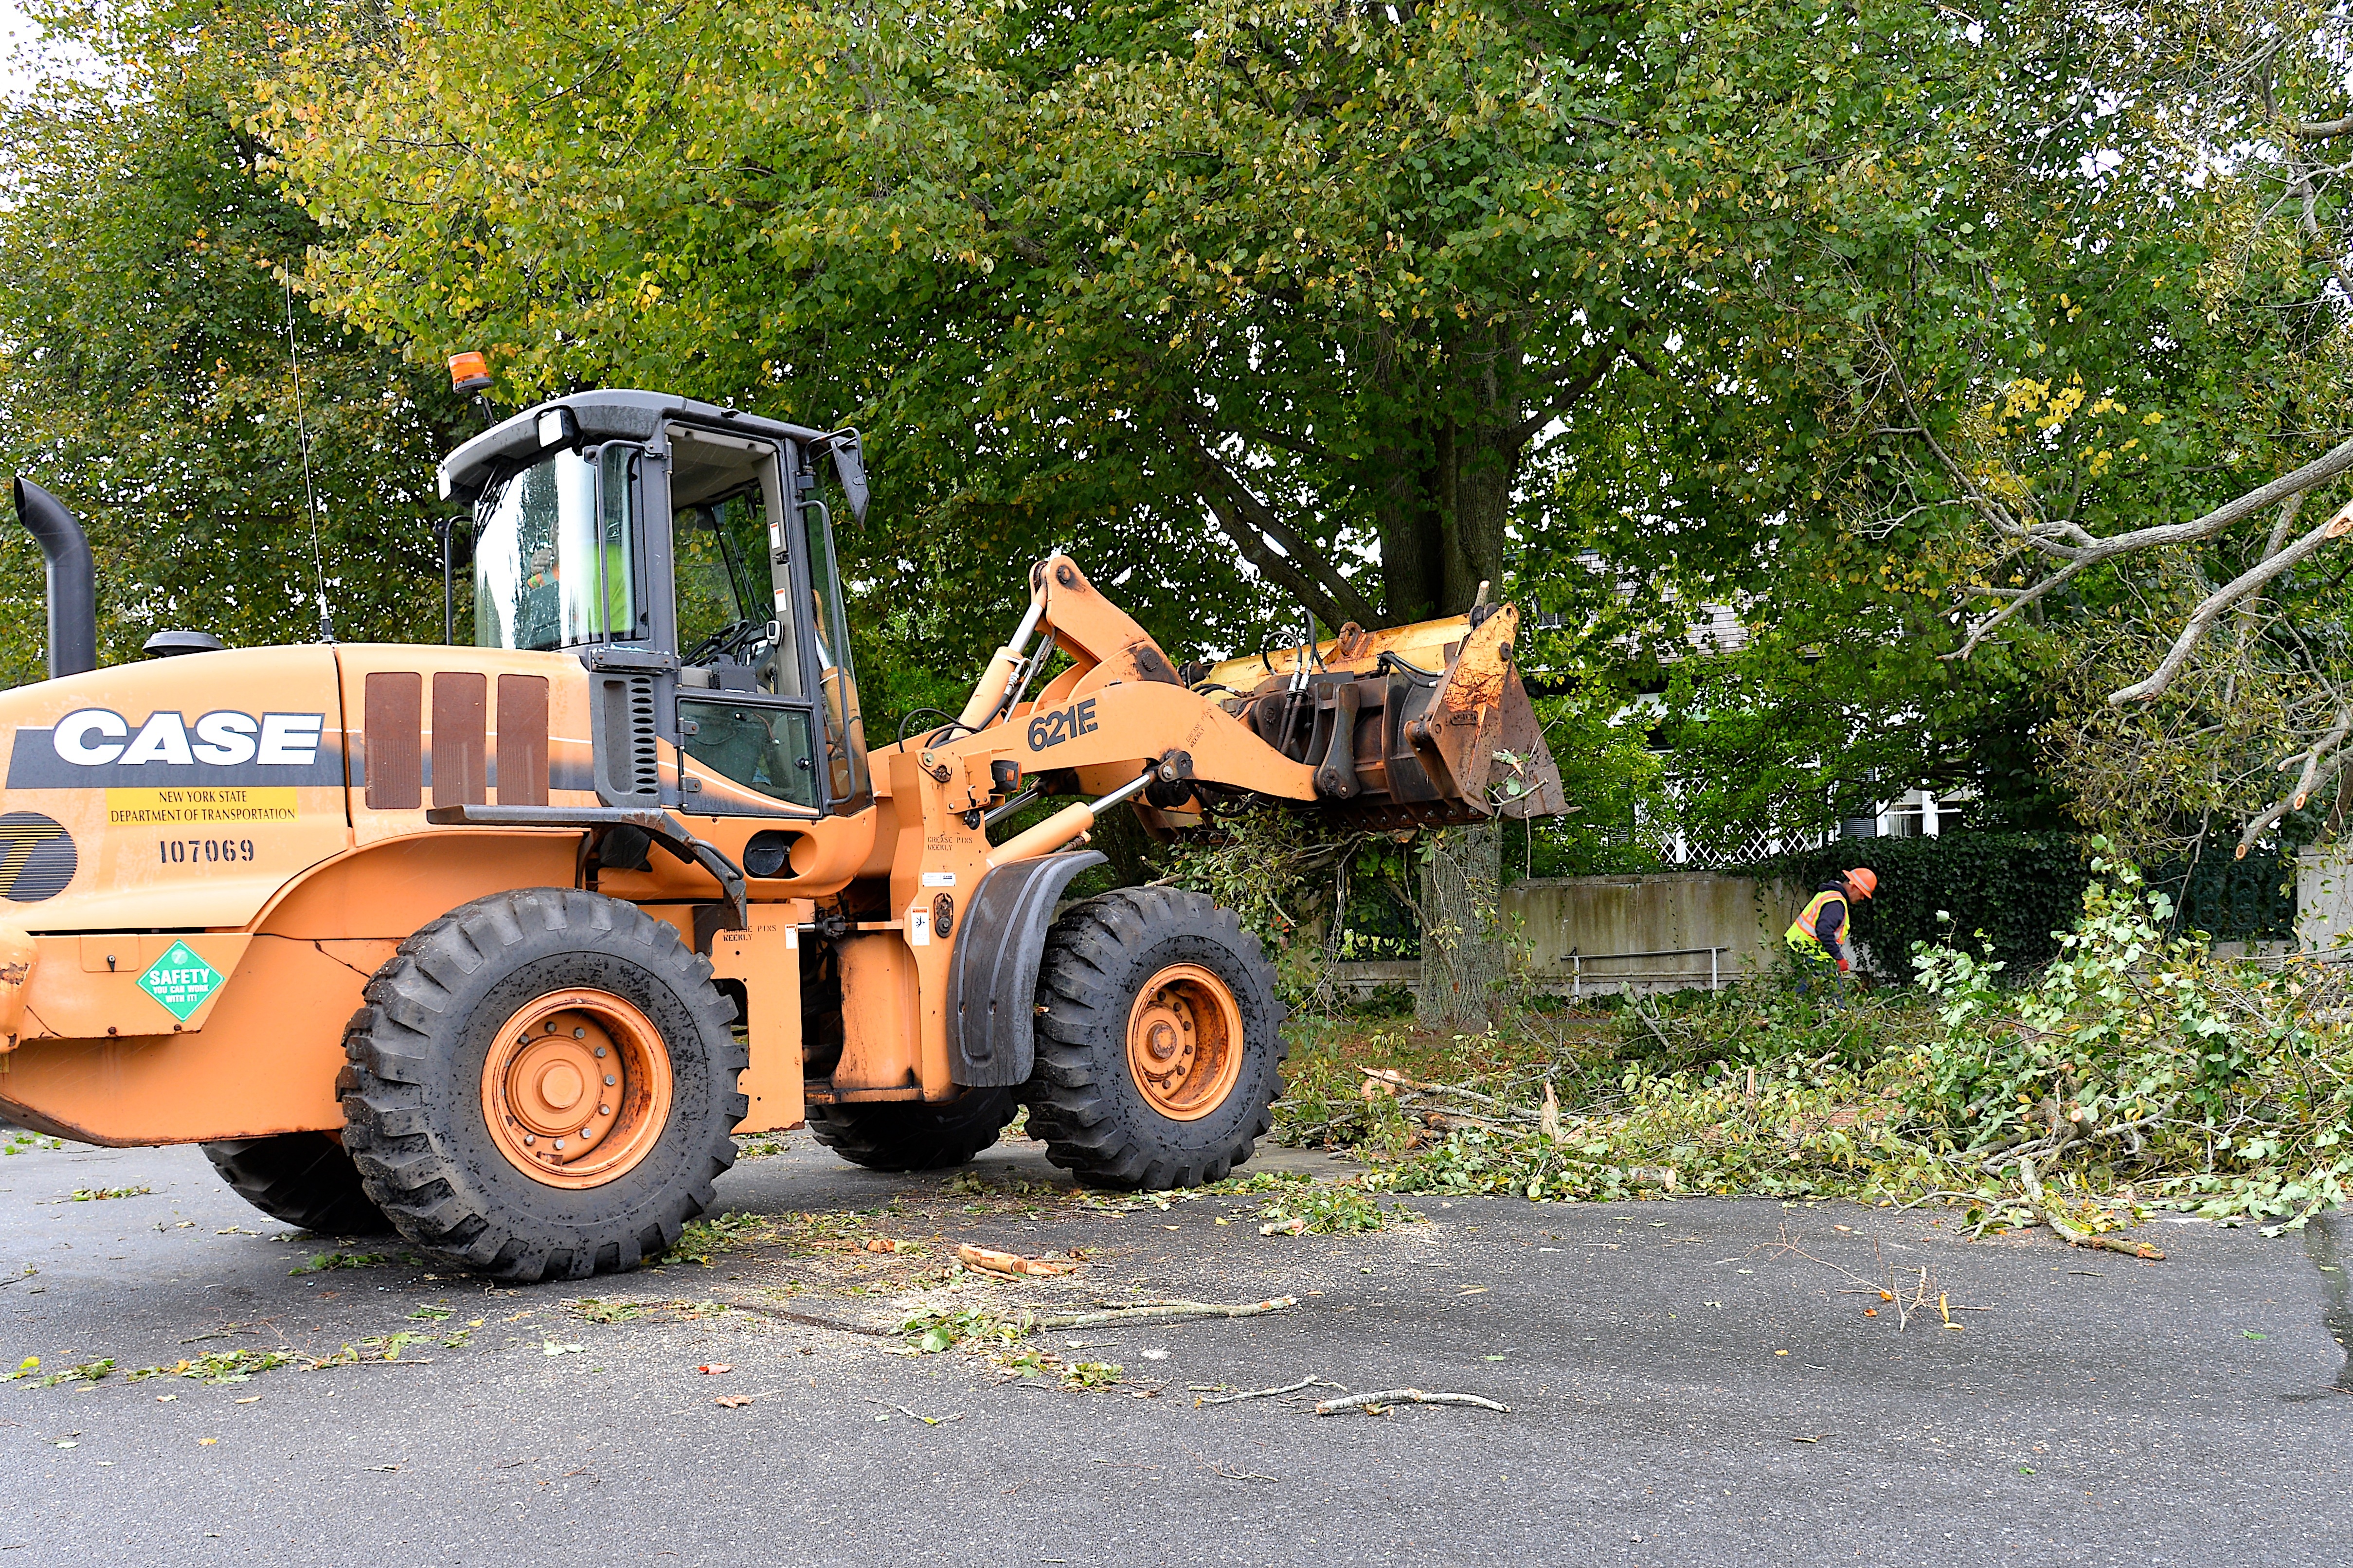 Crews were removing the tree on Thursday morning.  KYRIL BROMLEY